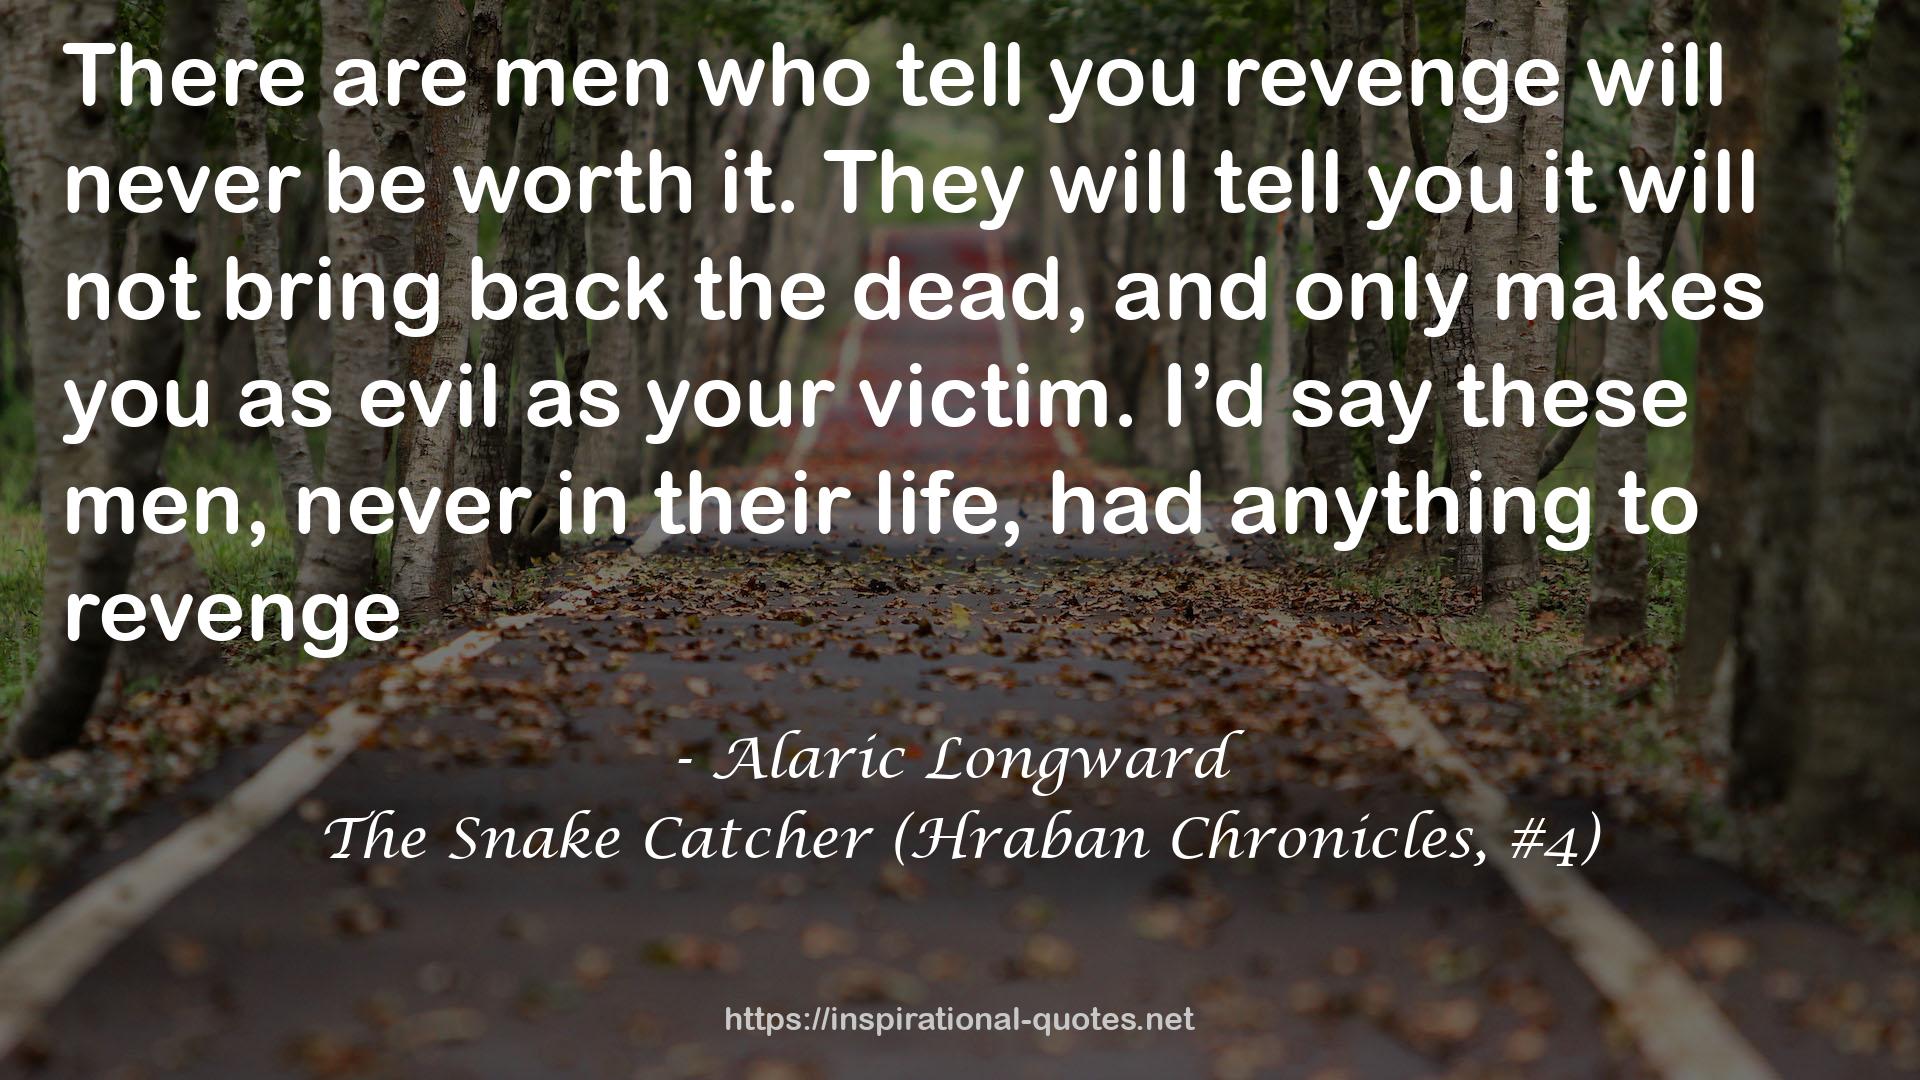 The Snake Catcher (Hraban Chronicles, #4) QUOTES